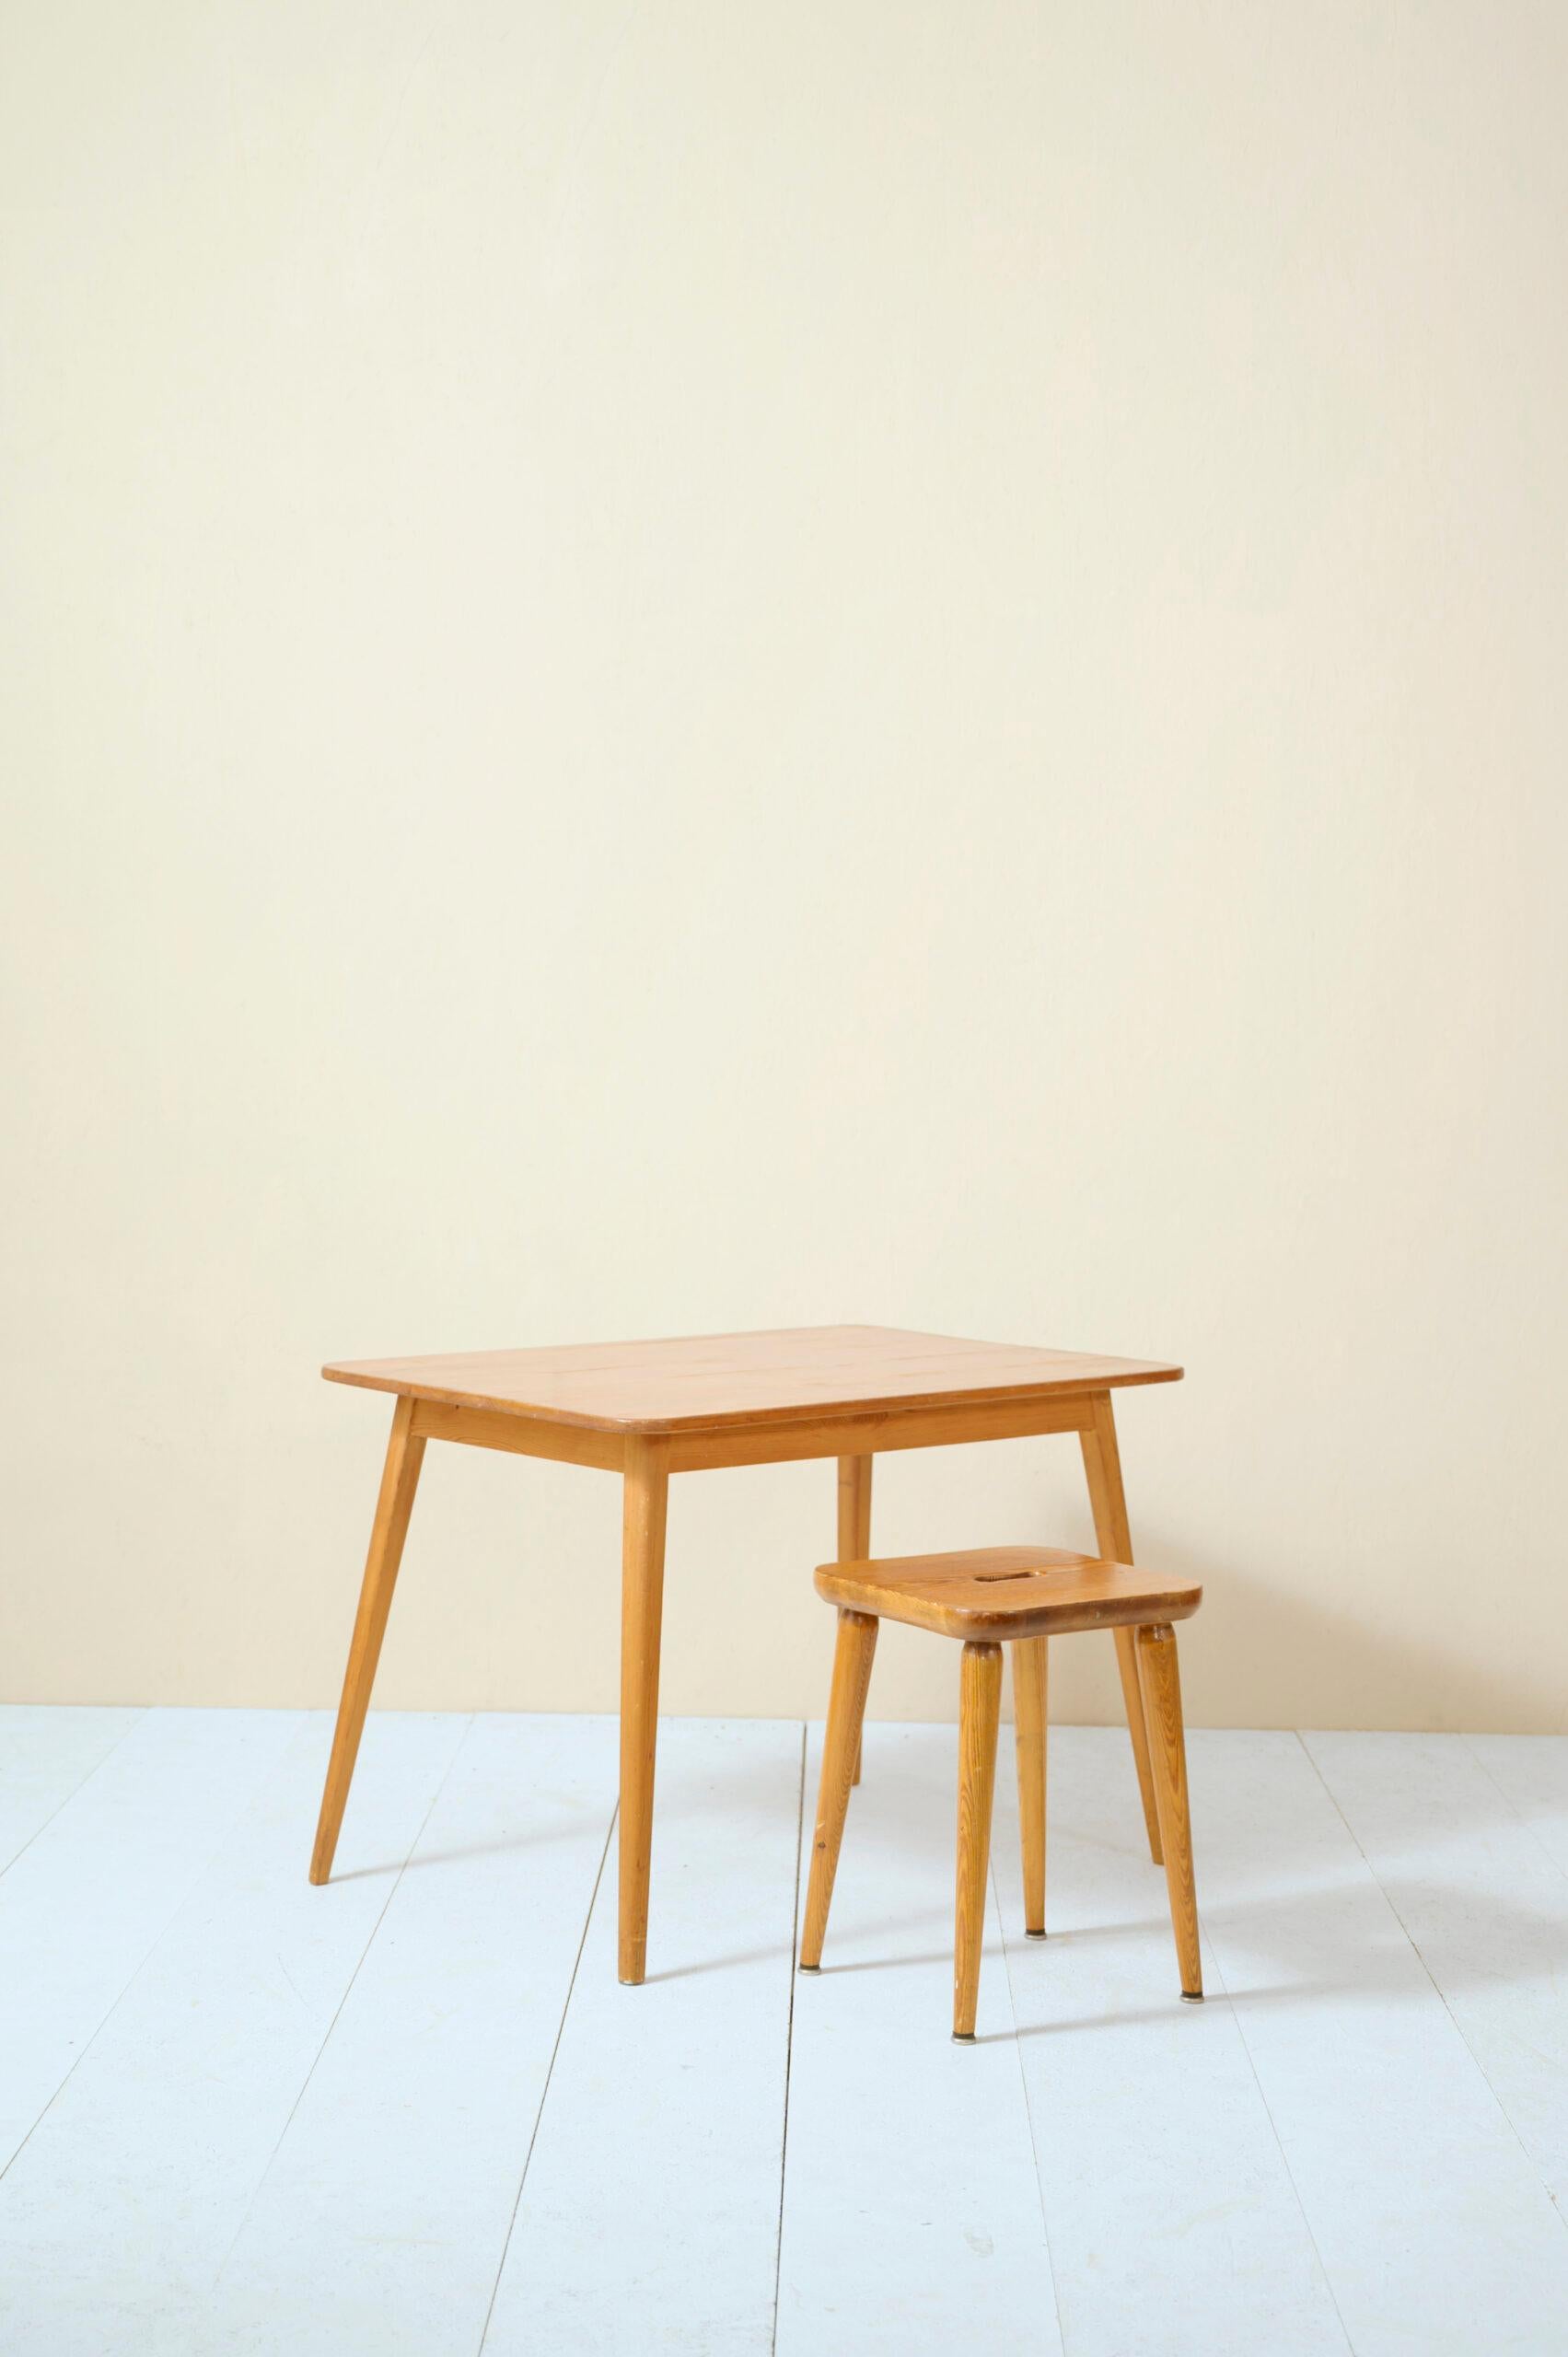 Mid-20th Century Swedish Desk and Stool by Göran Malmvall 1940s/'50s For Sale